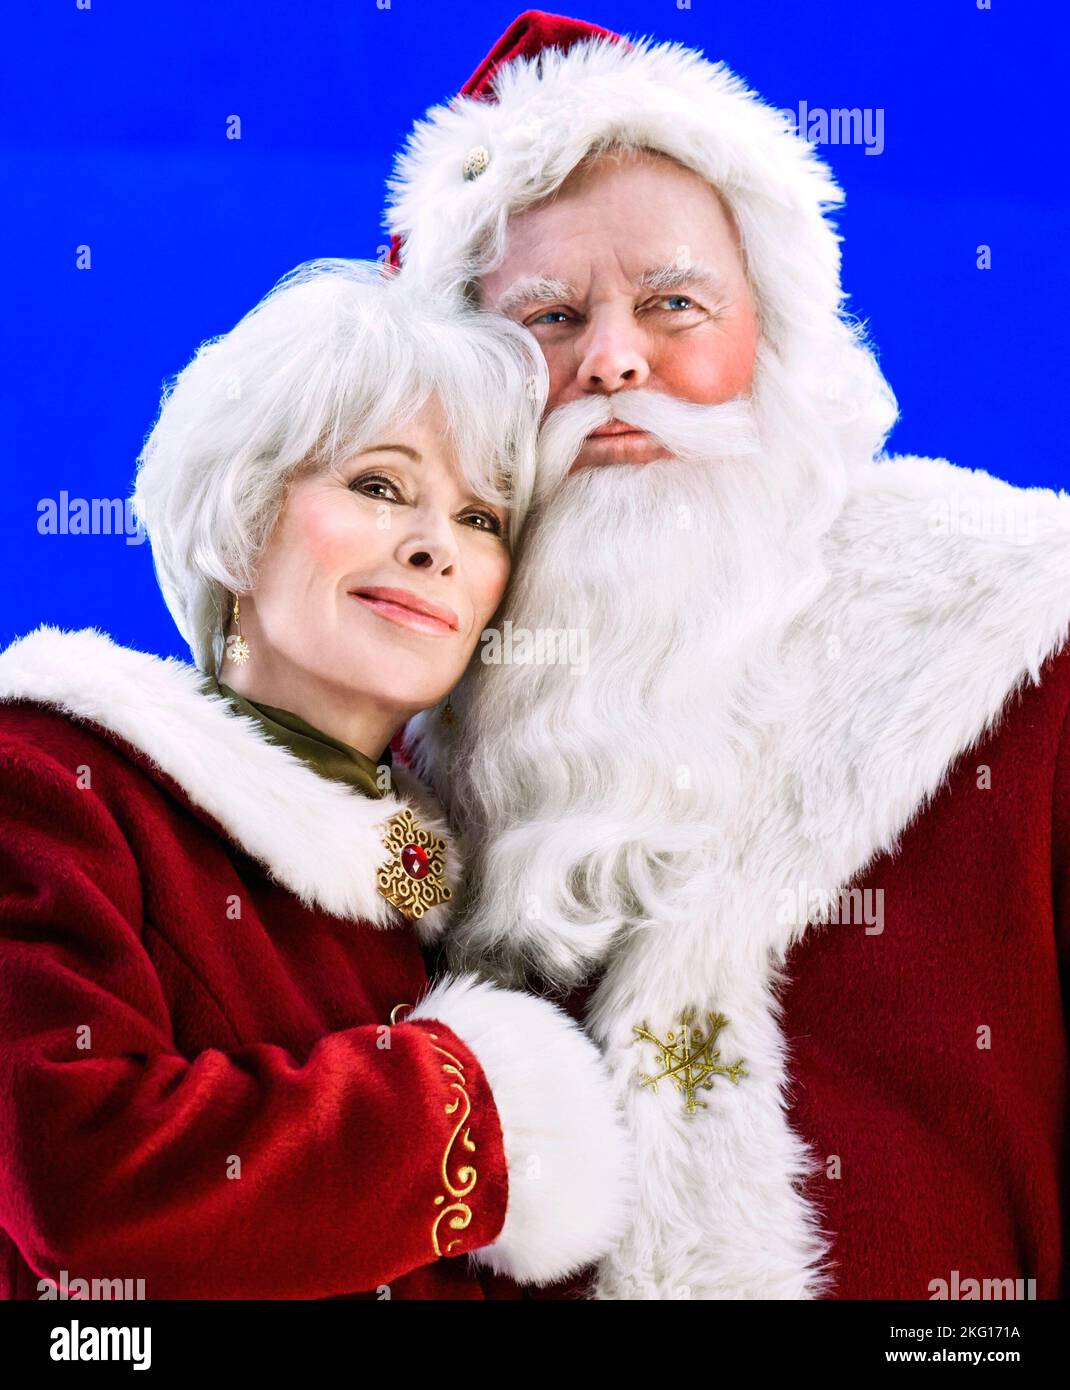 JILL ST. JOHN and ROBERT WAGNER in NORTHPOLE (2014), directed by DOUGLAS BARR. Credit: THE HALLMARK CHANNEL / Album Stock Photo